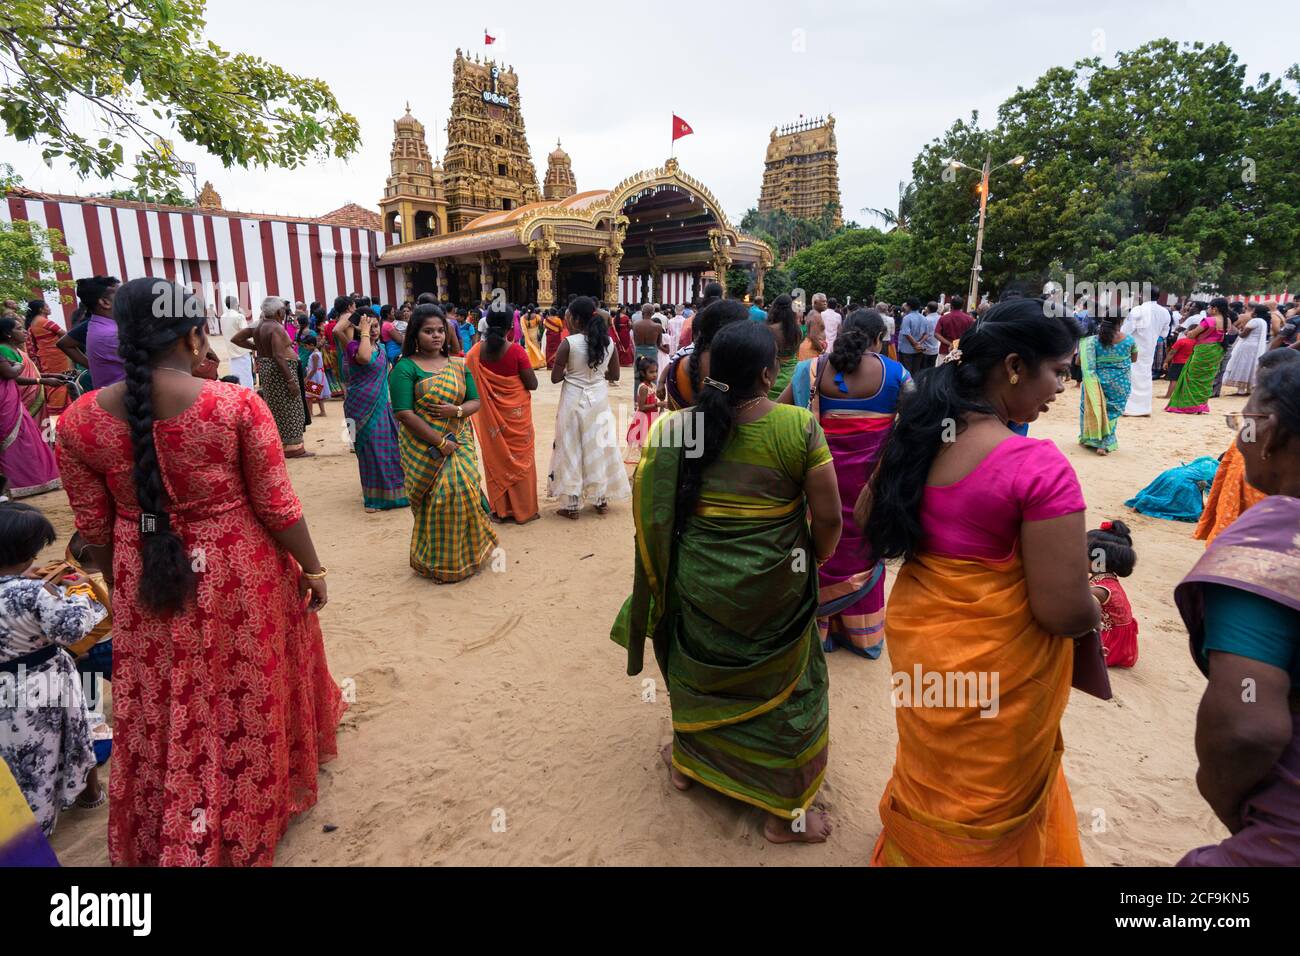 jaffna sri lanka august 9 2019 young tamil female in colorful traditional clothes while standing against crowd and temple during nallur kandaswamy kovil festival 2CF9KN5